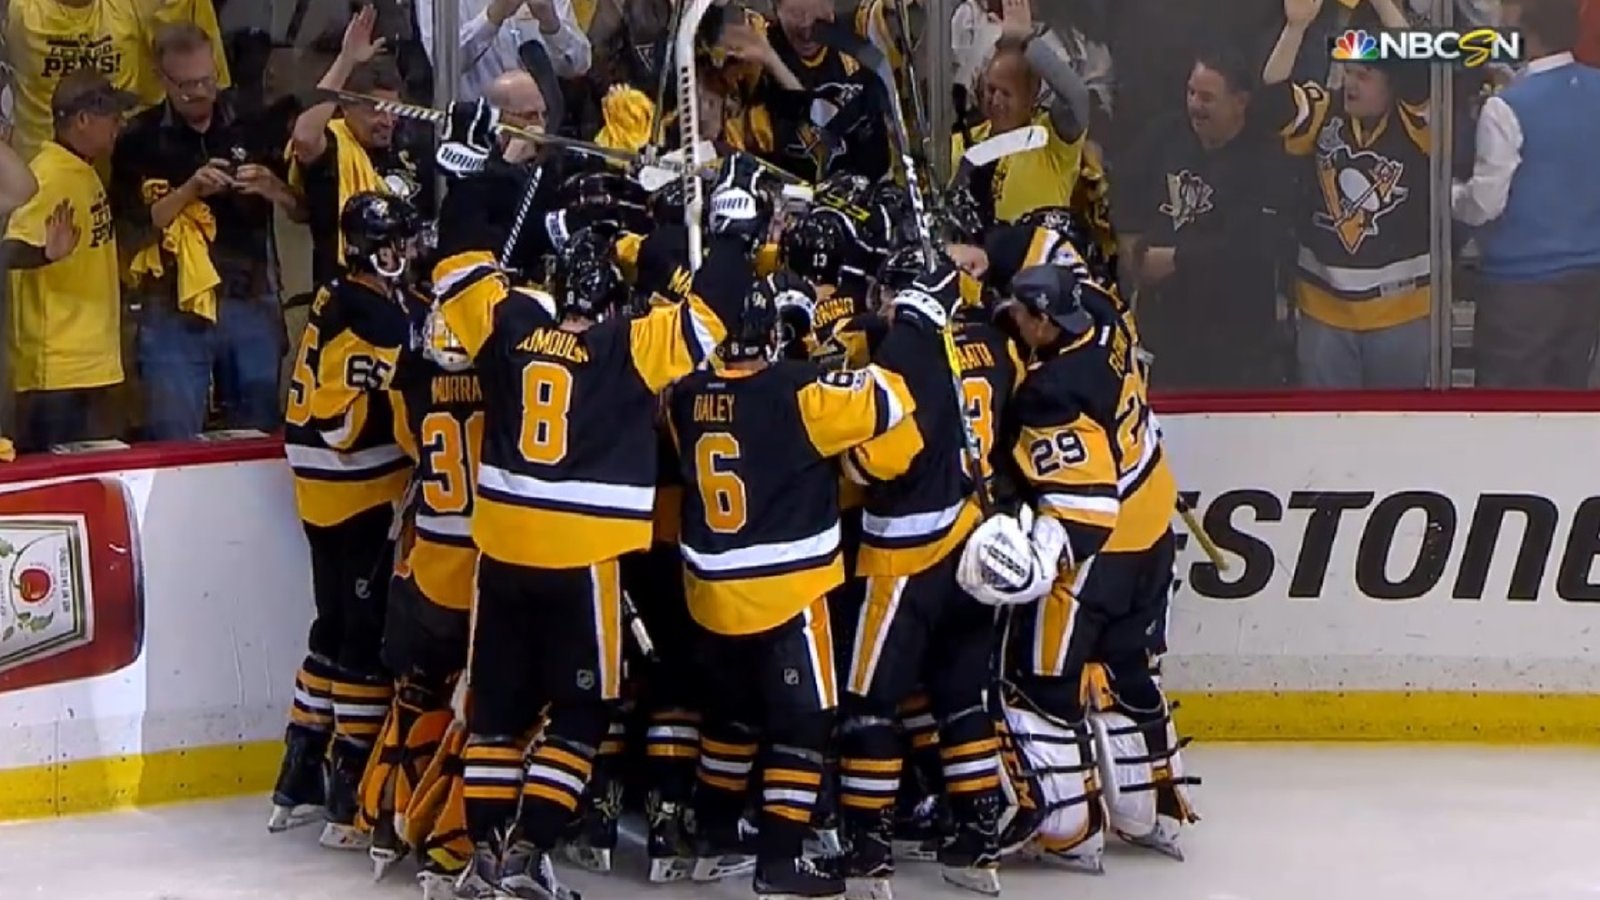 ICYMI: Penguins win Game 7 in a double overtime classic!